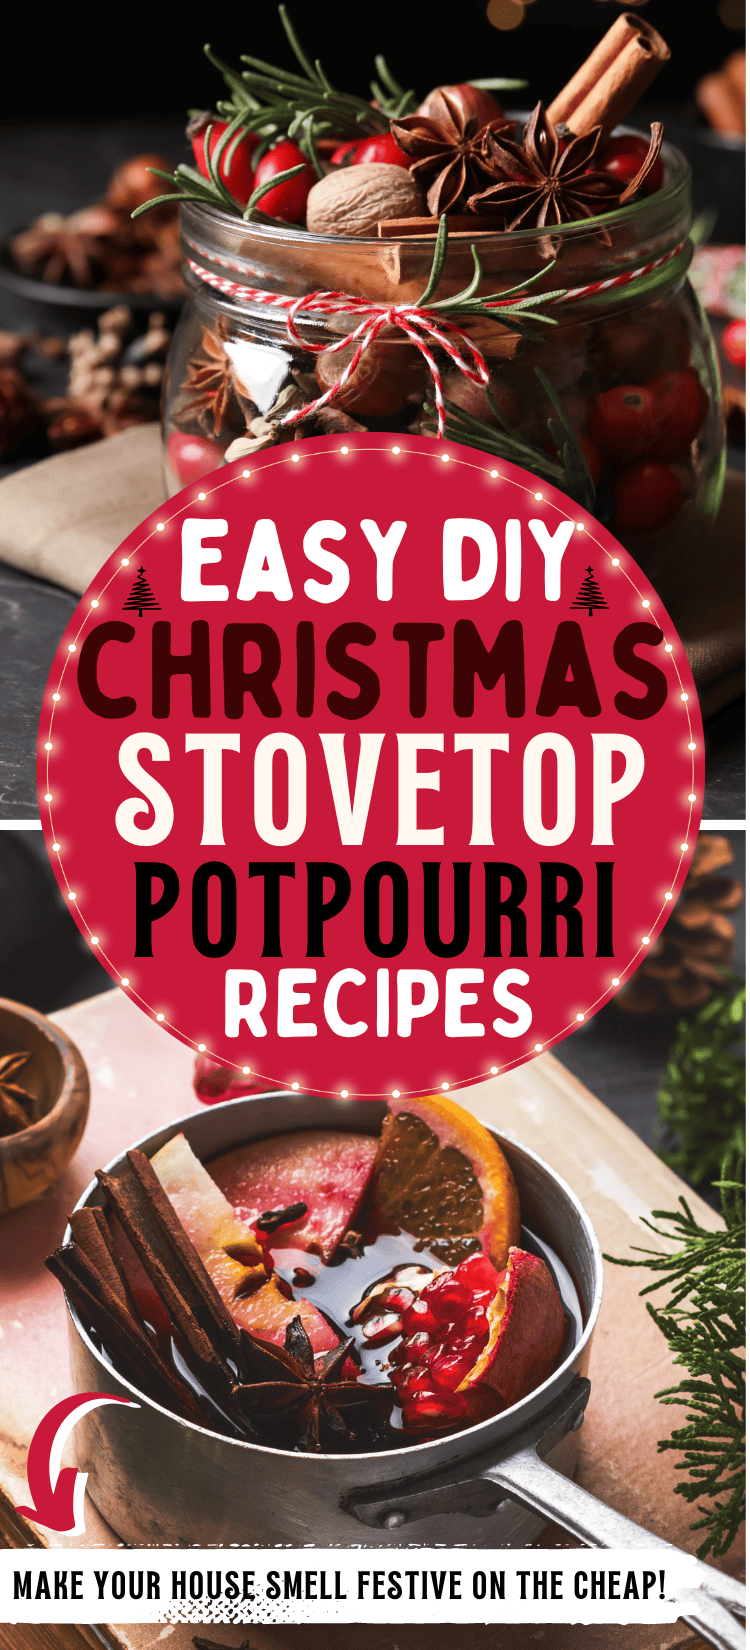 Easy Christmas stovetop potpourri DIY recipes! Make your house smell like Christmas with these diy christmas potpourri stovetop recipes. Homemade potpourri stovetop christmas, diy simmering potpourri recipes christmas, christmas stovetop potpourri gift diy, christmas potpourri stovetop recipe, christmas potpourri stovetop easy, crockpot christmas potpourri, diy christmas potpourri recipes, christmas scent diy potpourri recipes, diy christmas potpourri tags, stove top christmas potpourri gifts.